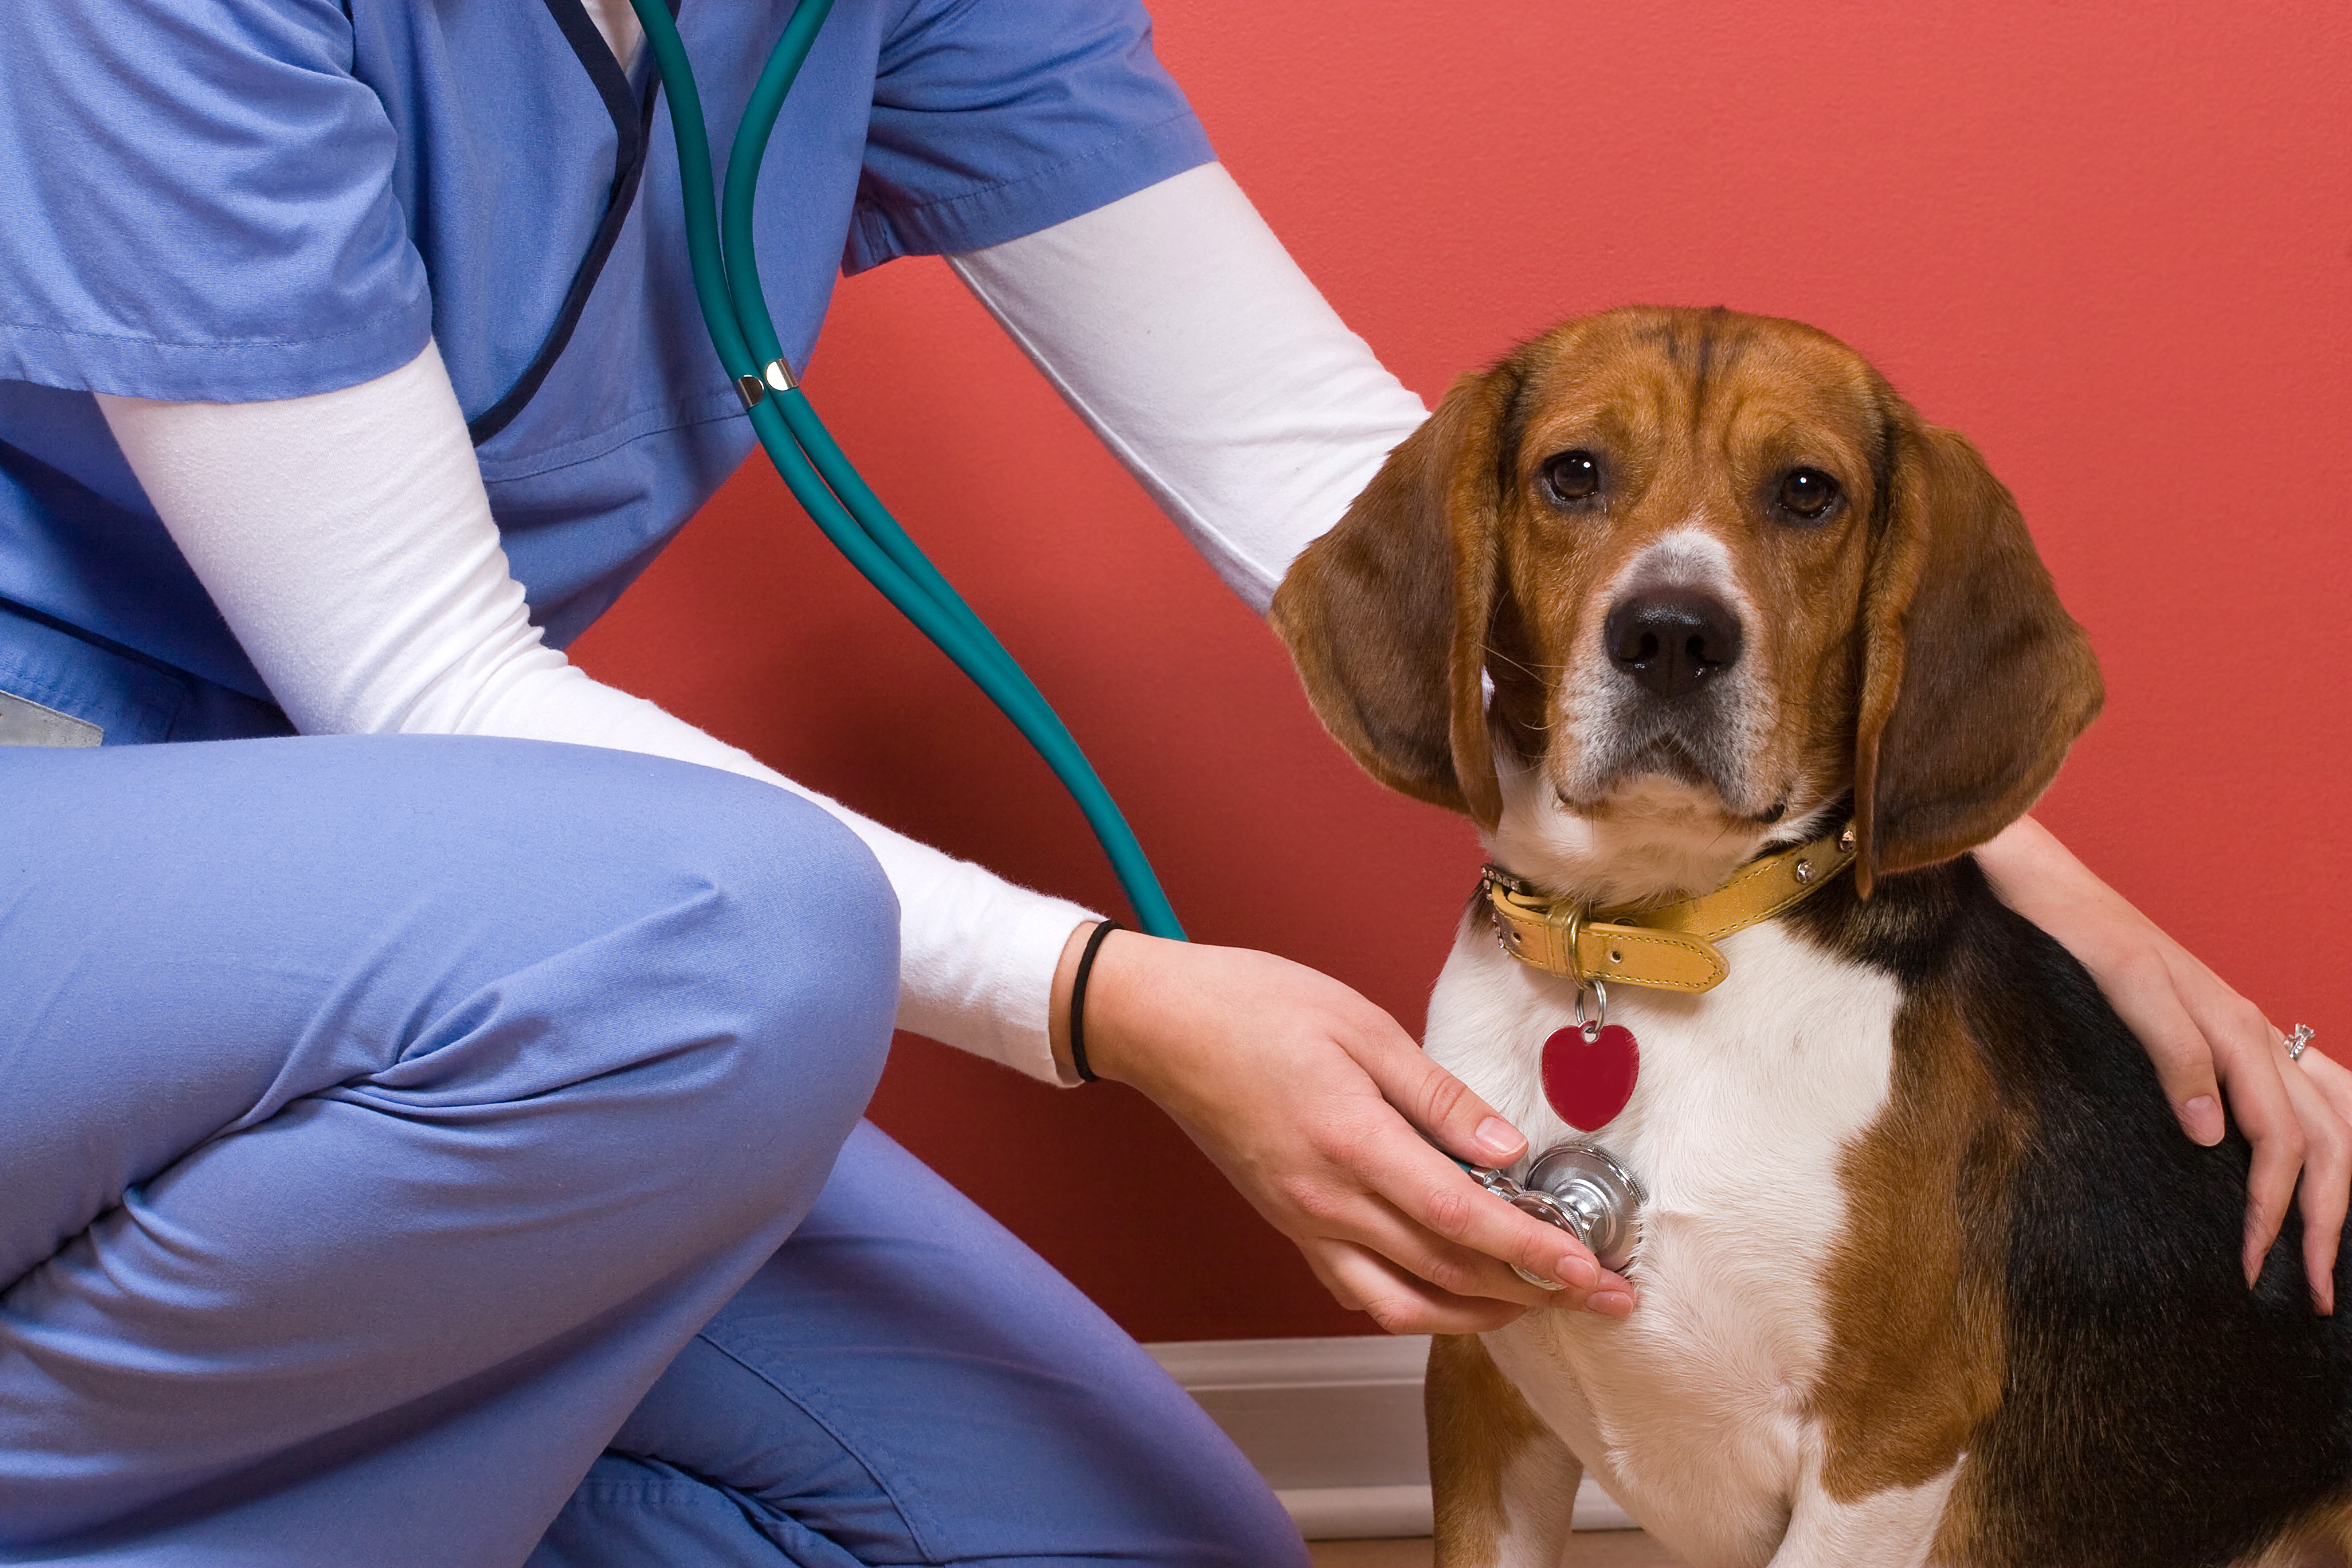 What Is a Wellness Examination, and How Often Should Your Veterinarian Perform One?